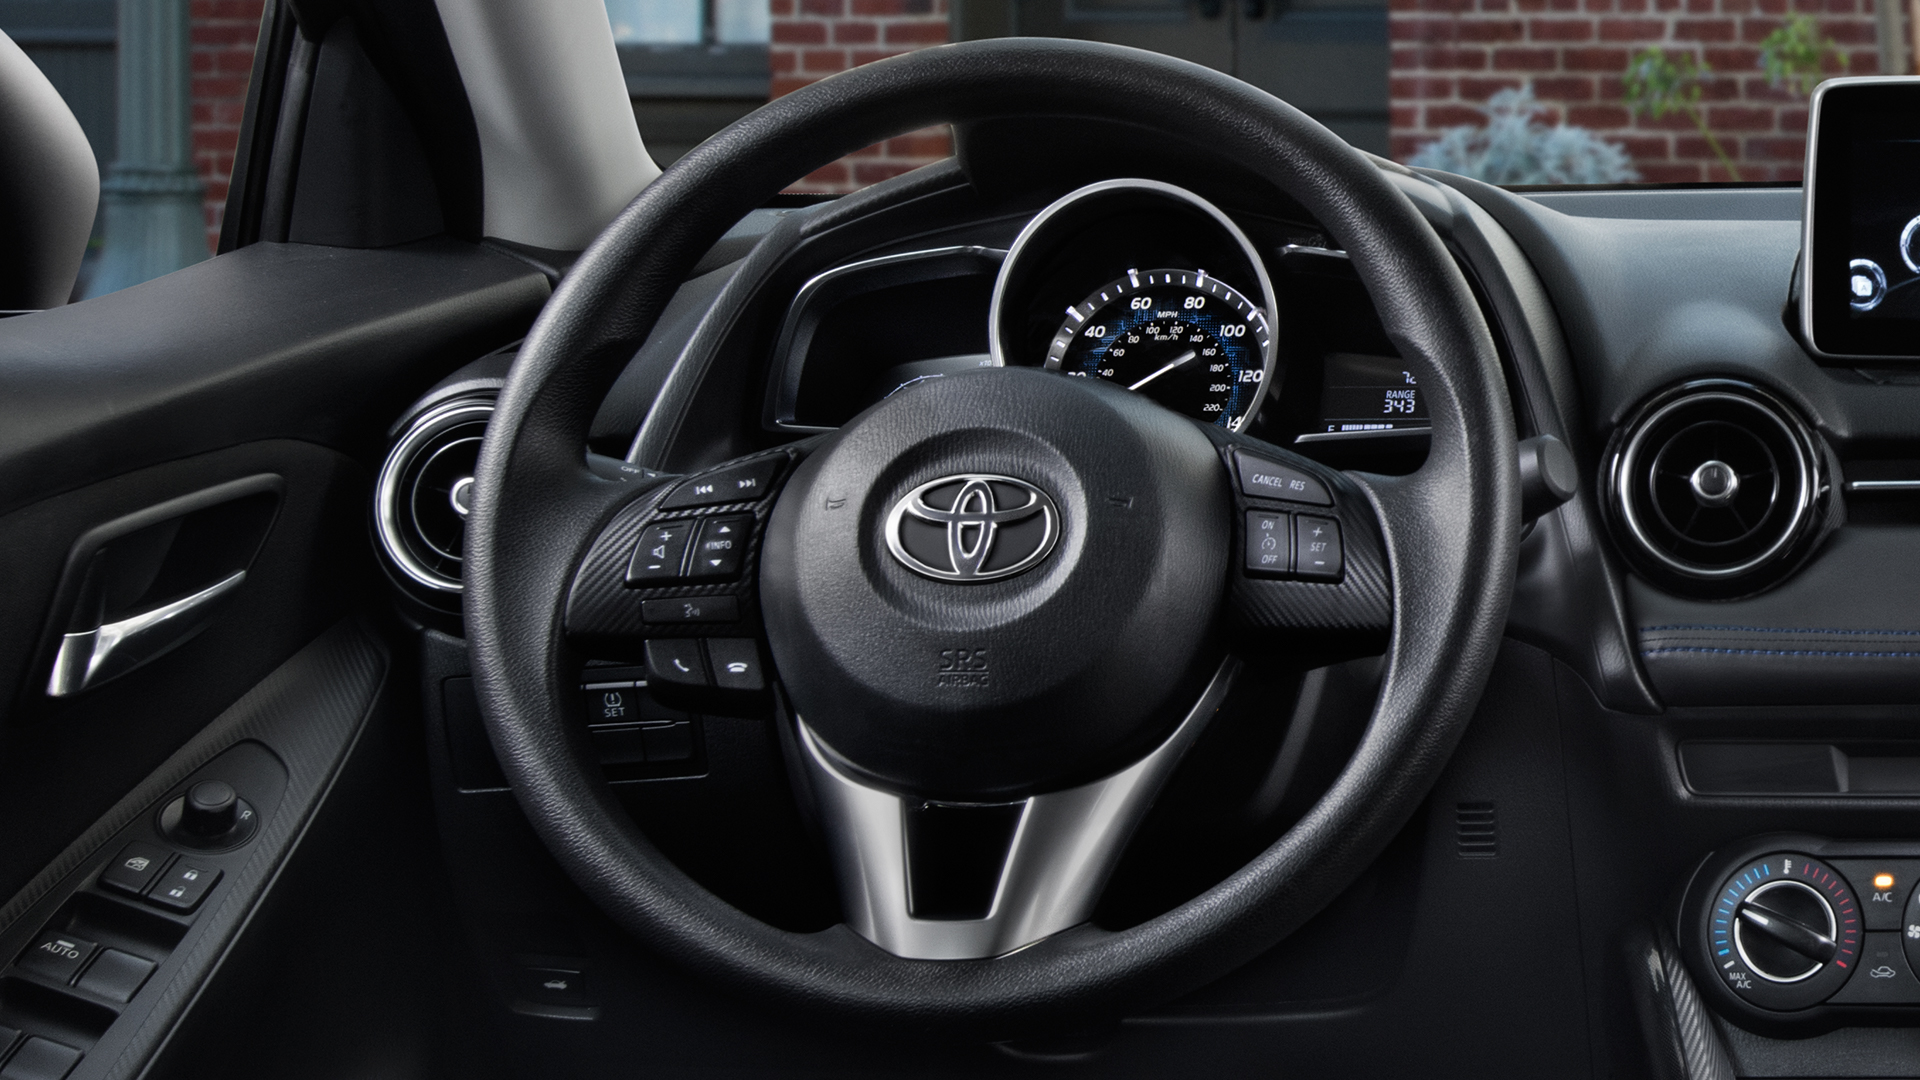 Toyota Yaris 2017 Interior Pictures Cars Models 2016